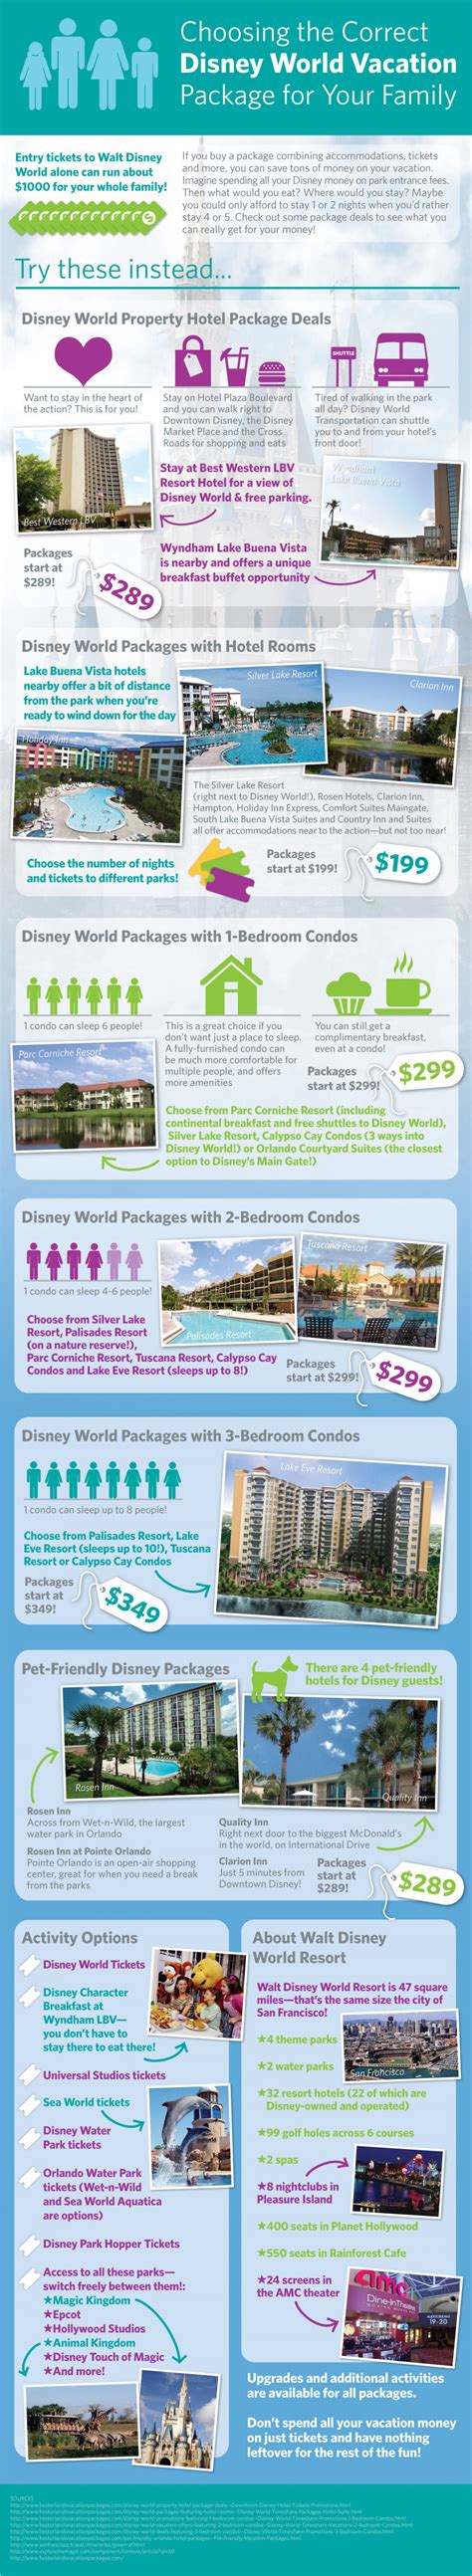 Choosing The Correct Disney World Vacation Package For